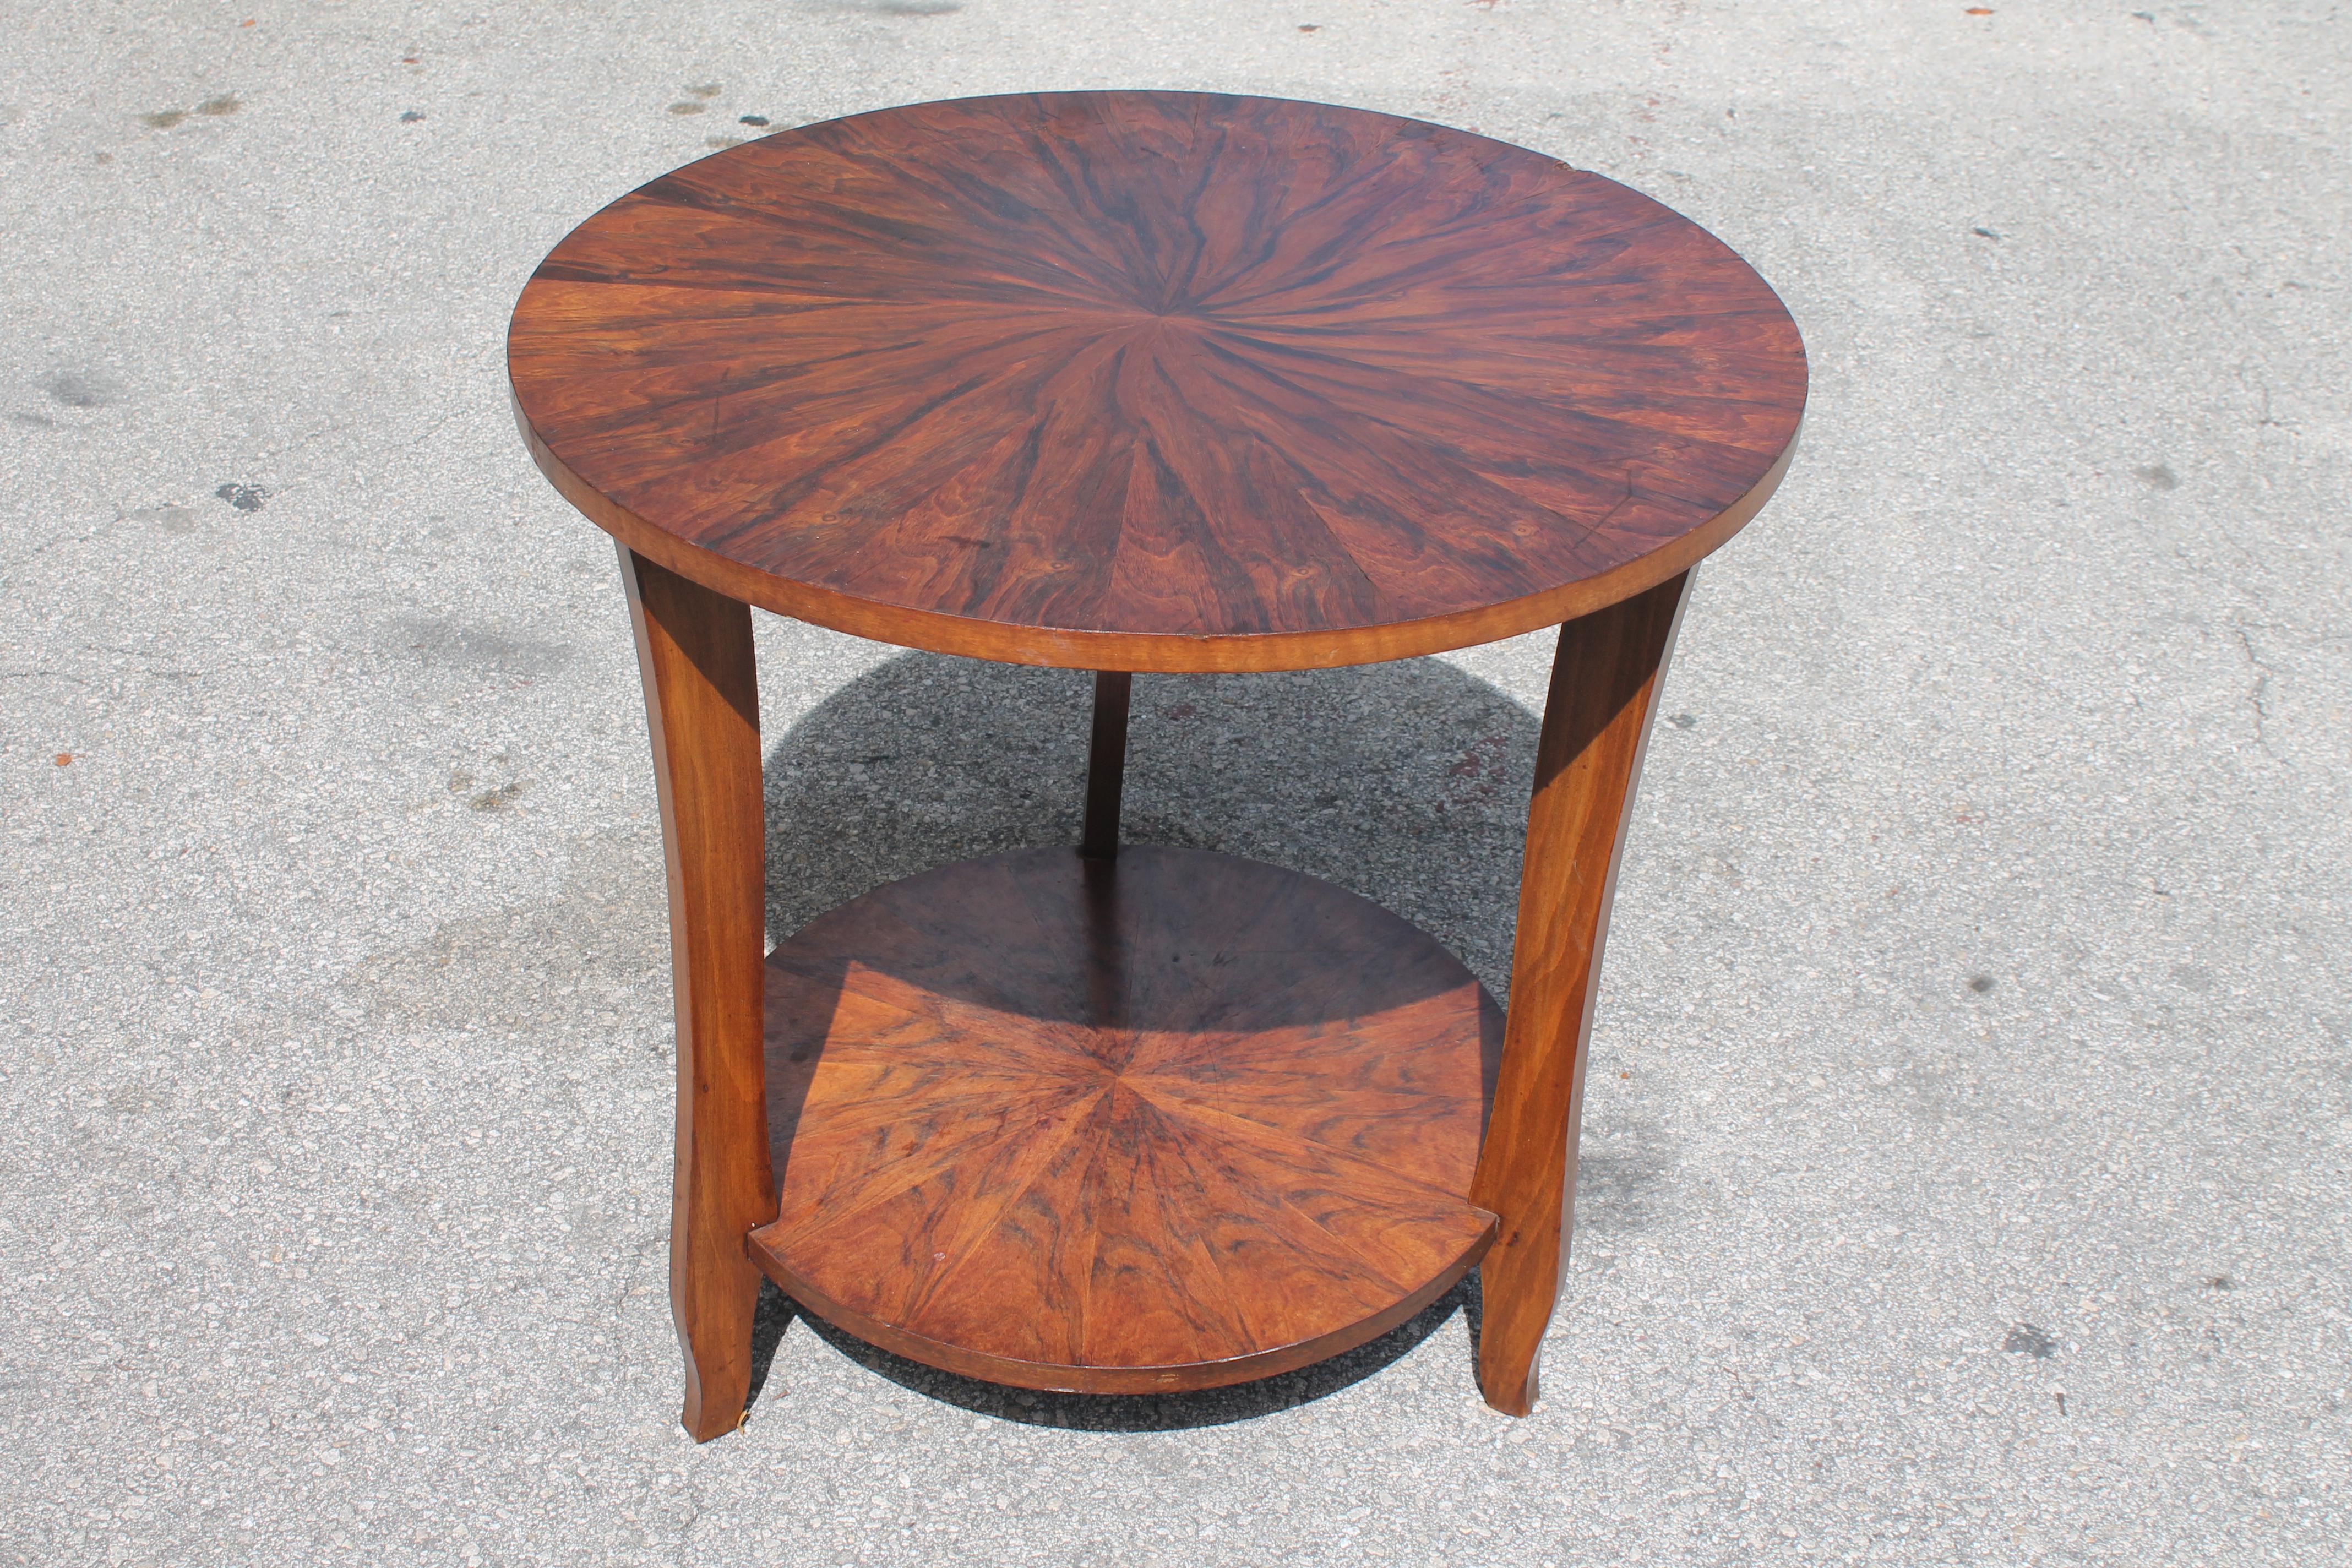 1930's French Art Deco Round Exotic Walnut Side Table/ Accent Table For Sale 1